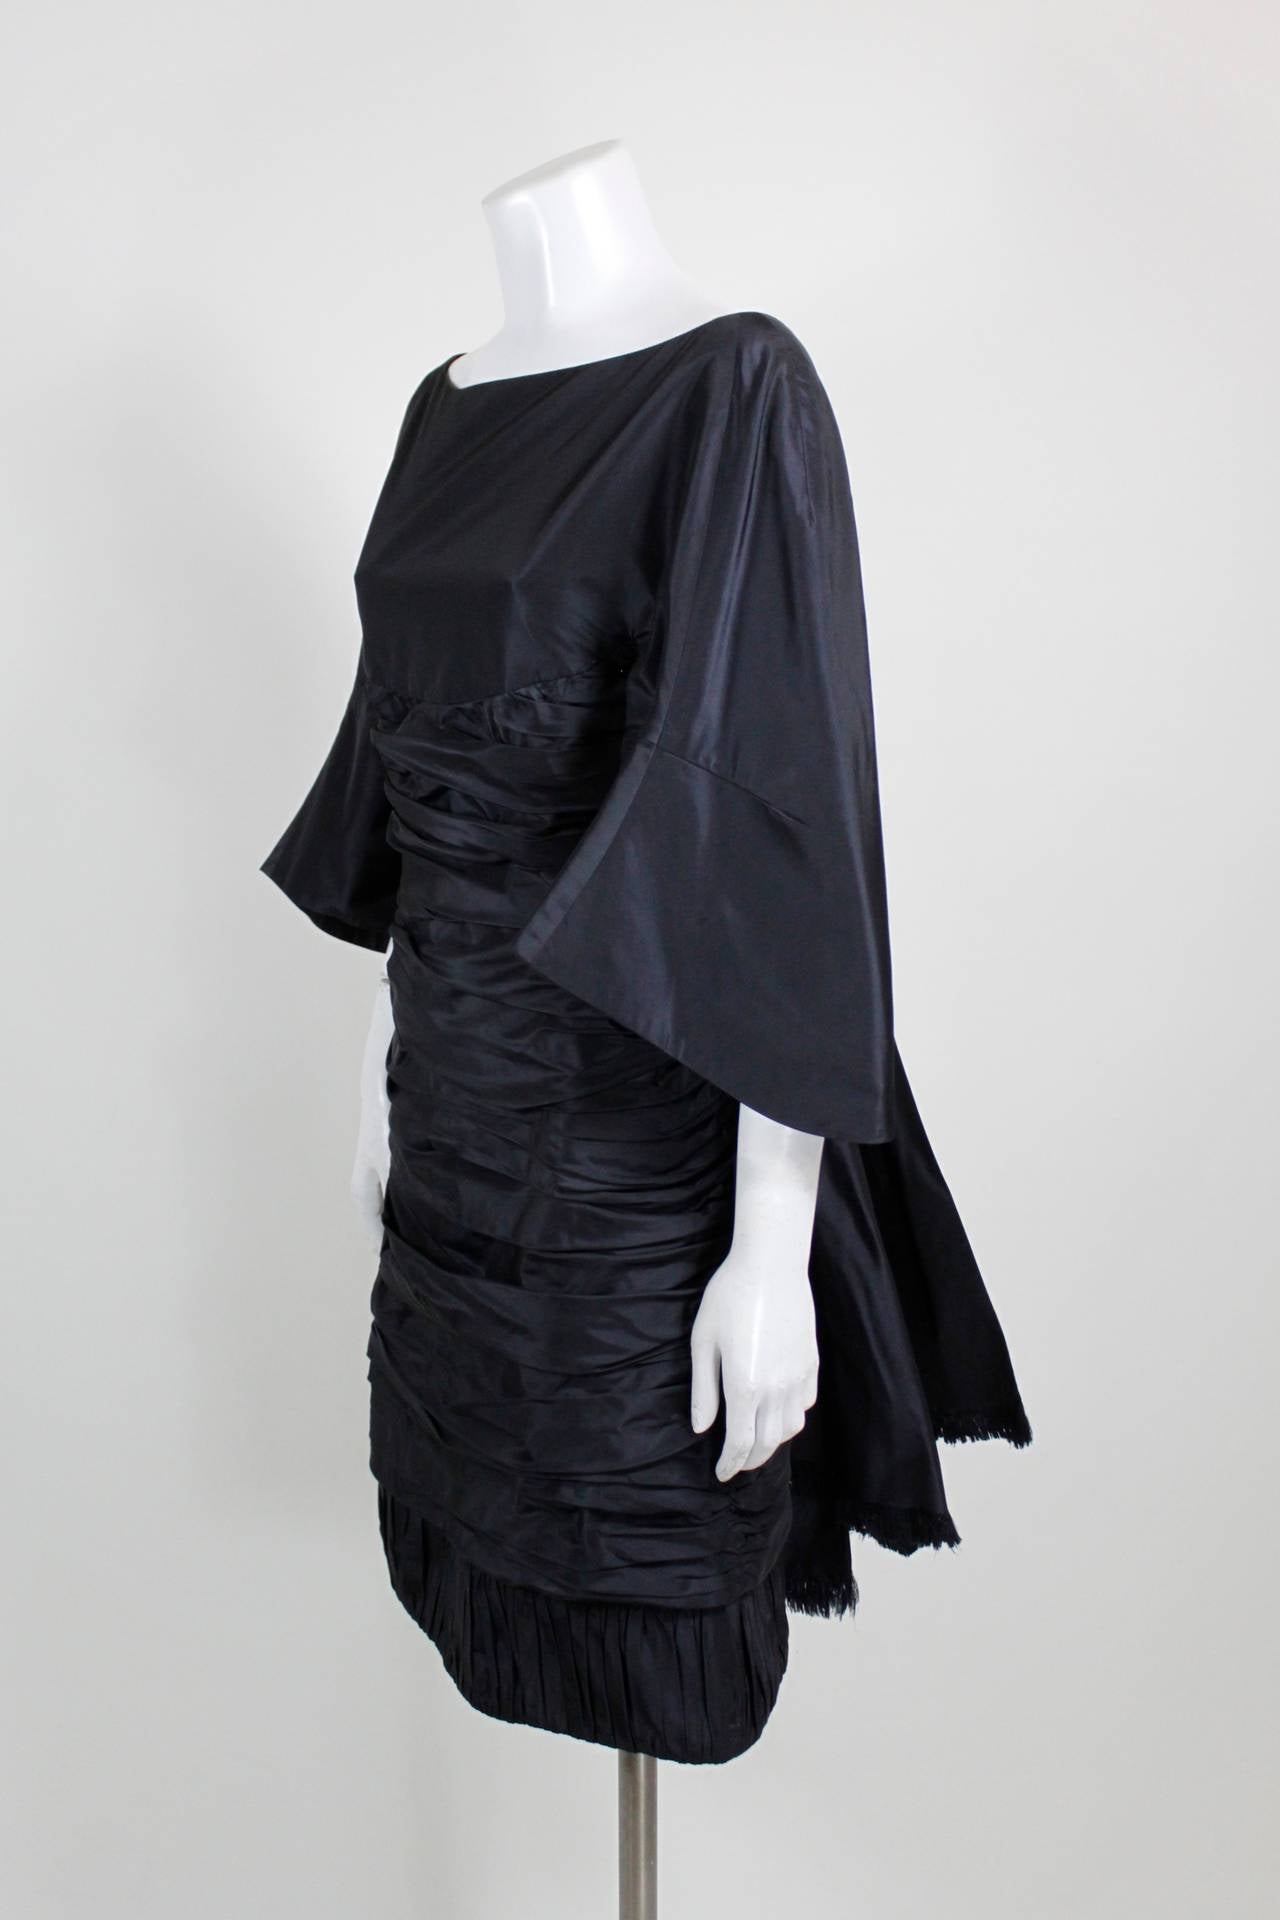 Ralph Rucci Taffeta Cocktail Dress In Excellent Condition For Sale In Los Angeles, CA